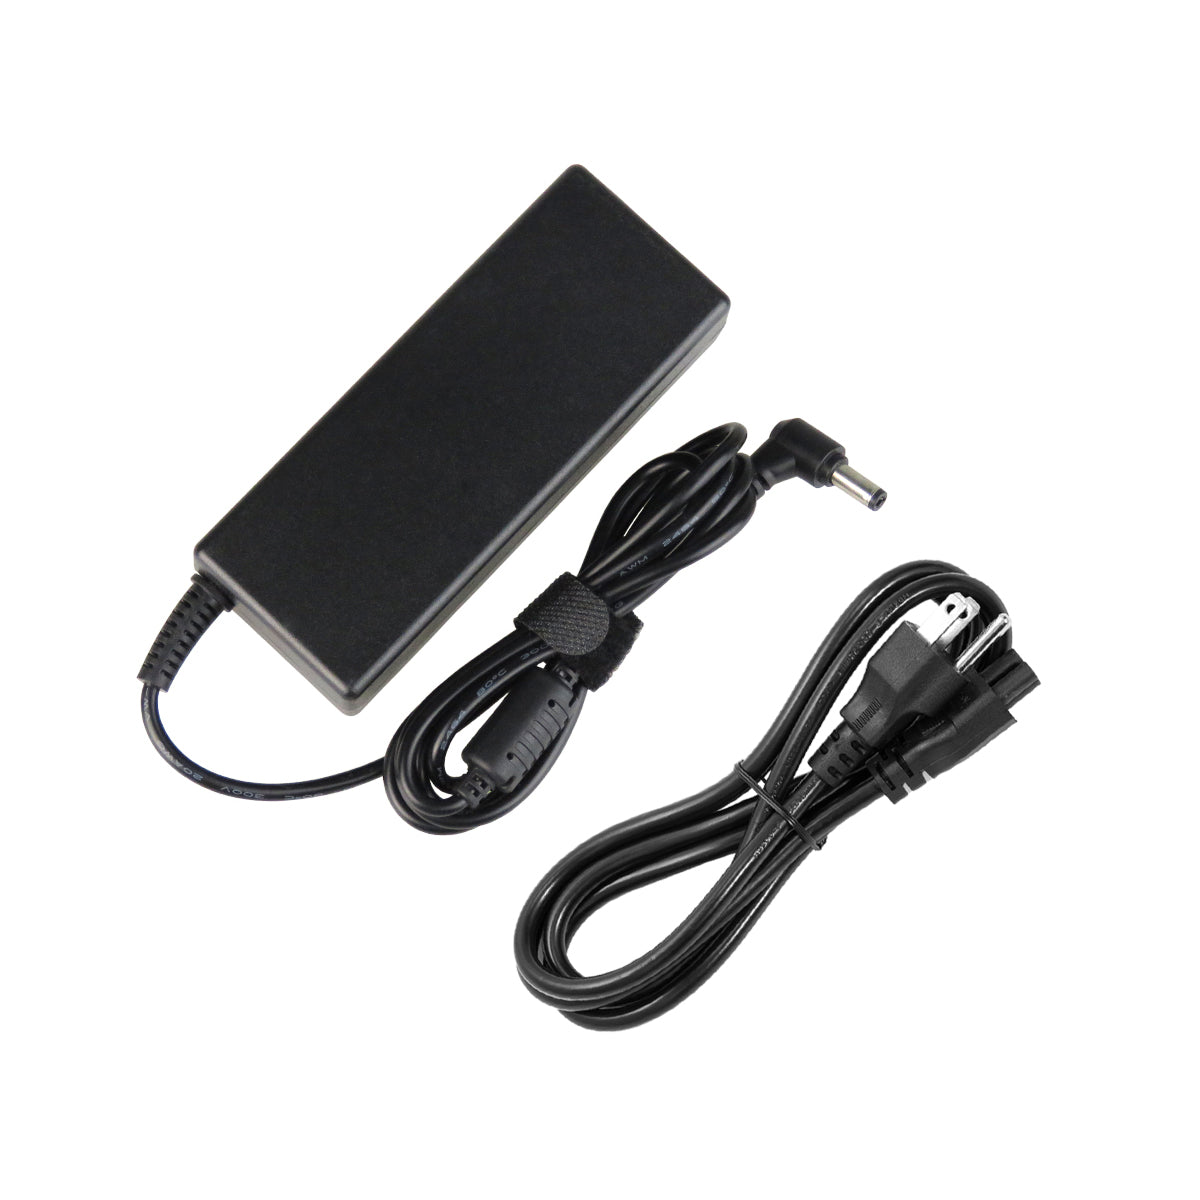 AC Adapter Charger for ASUS U58 Notebook.